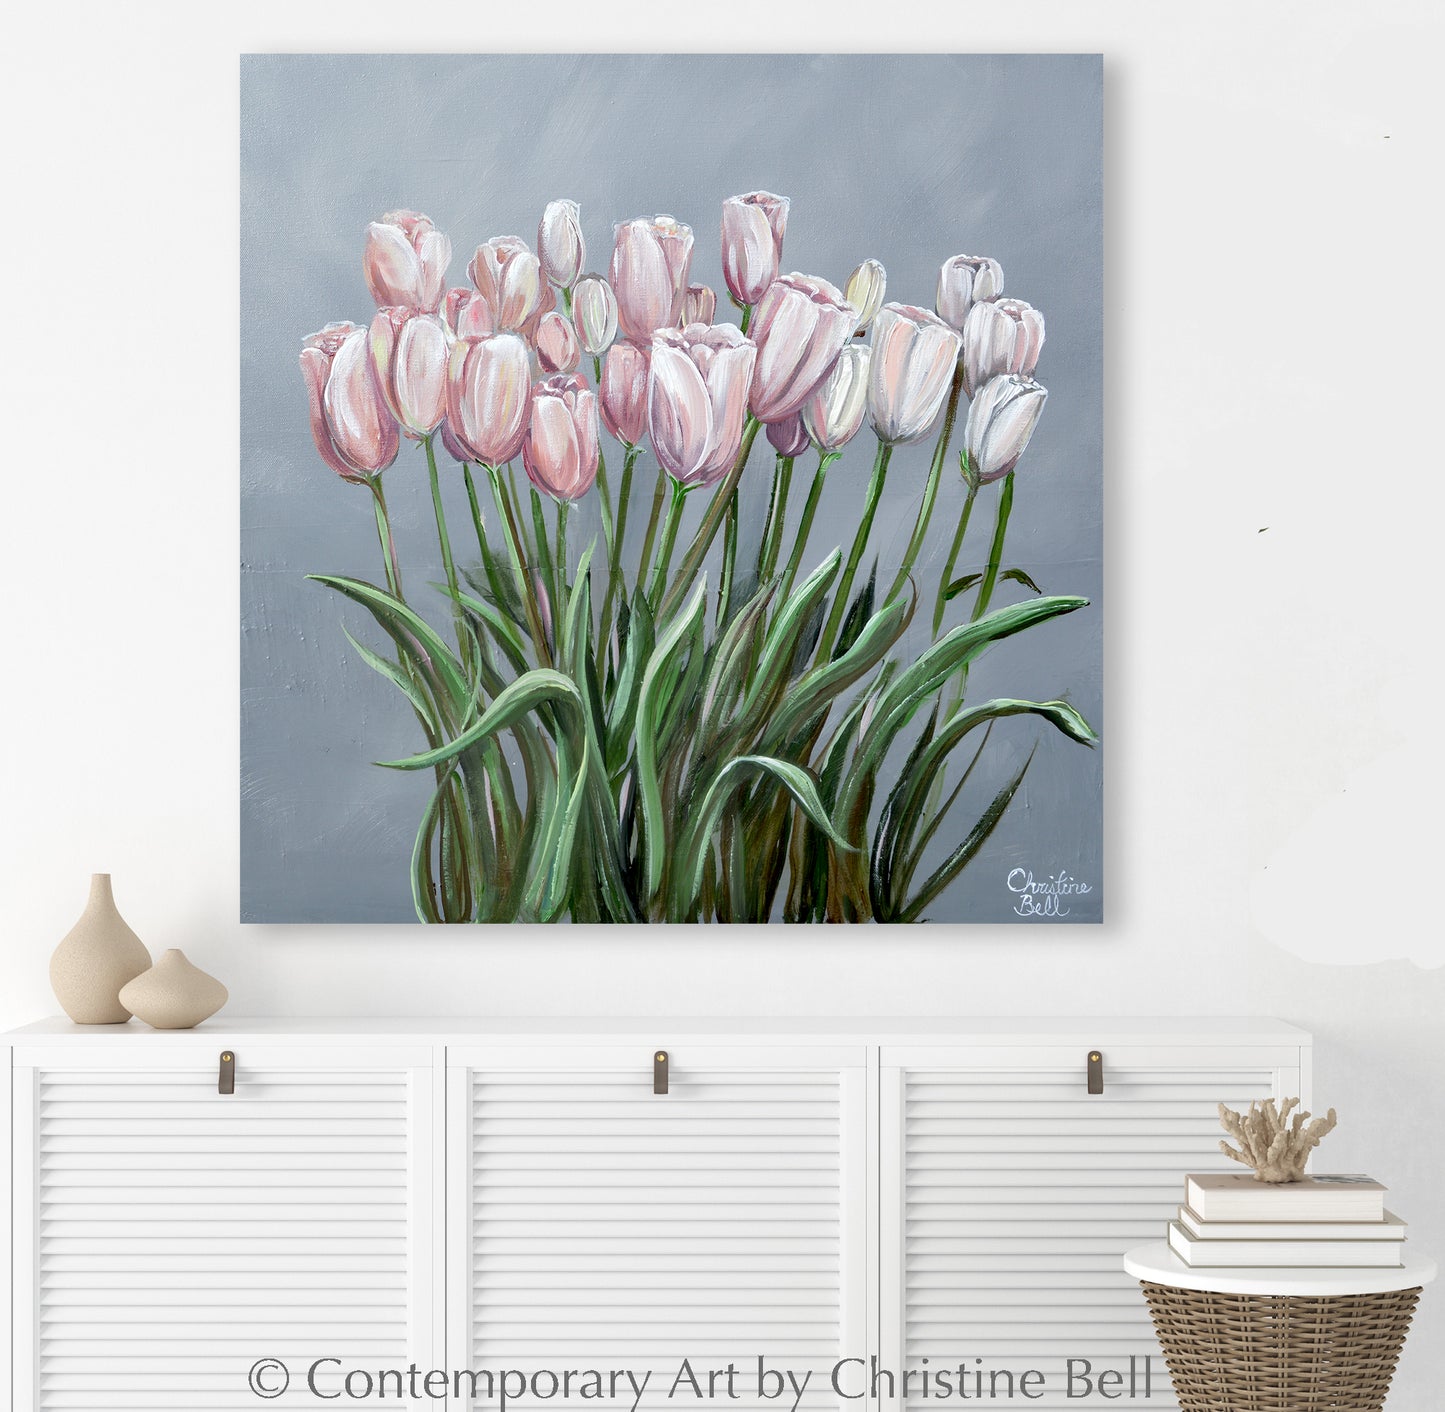 "Tip Toe Through the Tulips" GICLEE PRINT Pink Tulips Painting, Floral Flowers